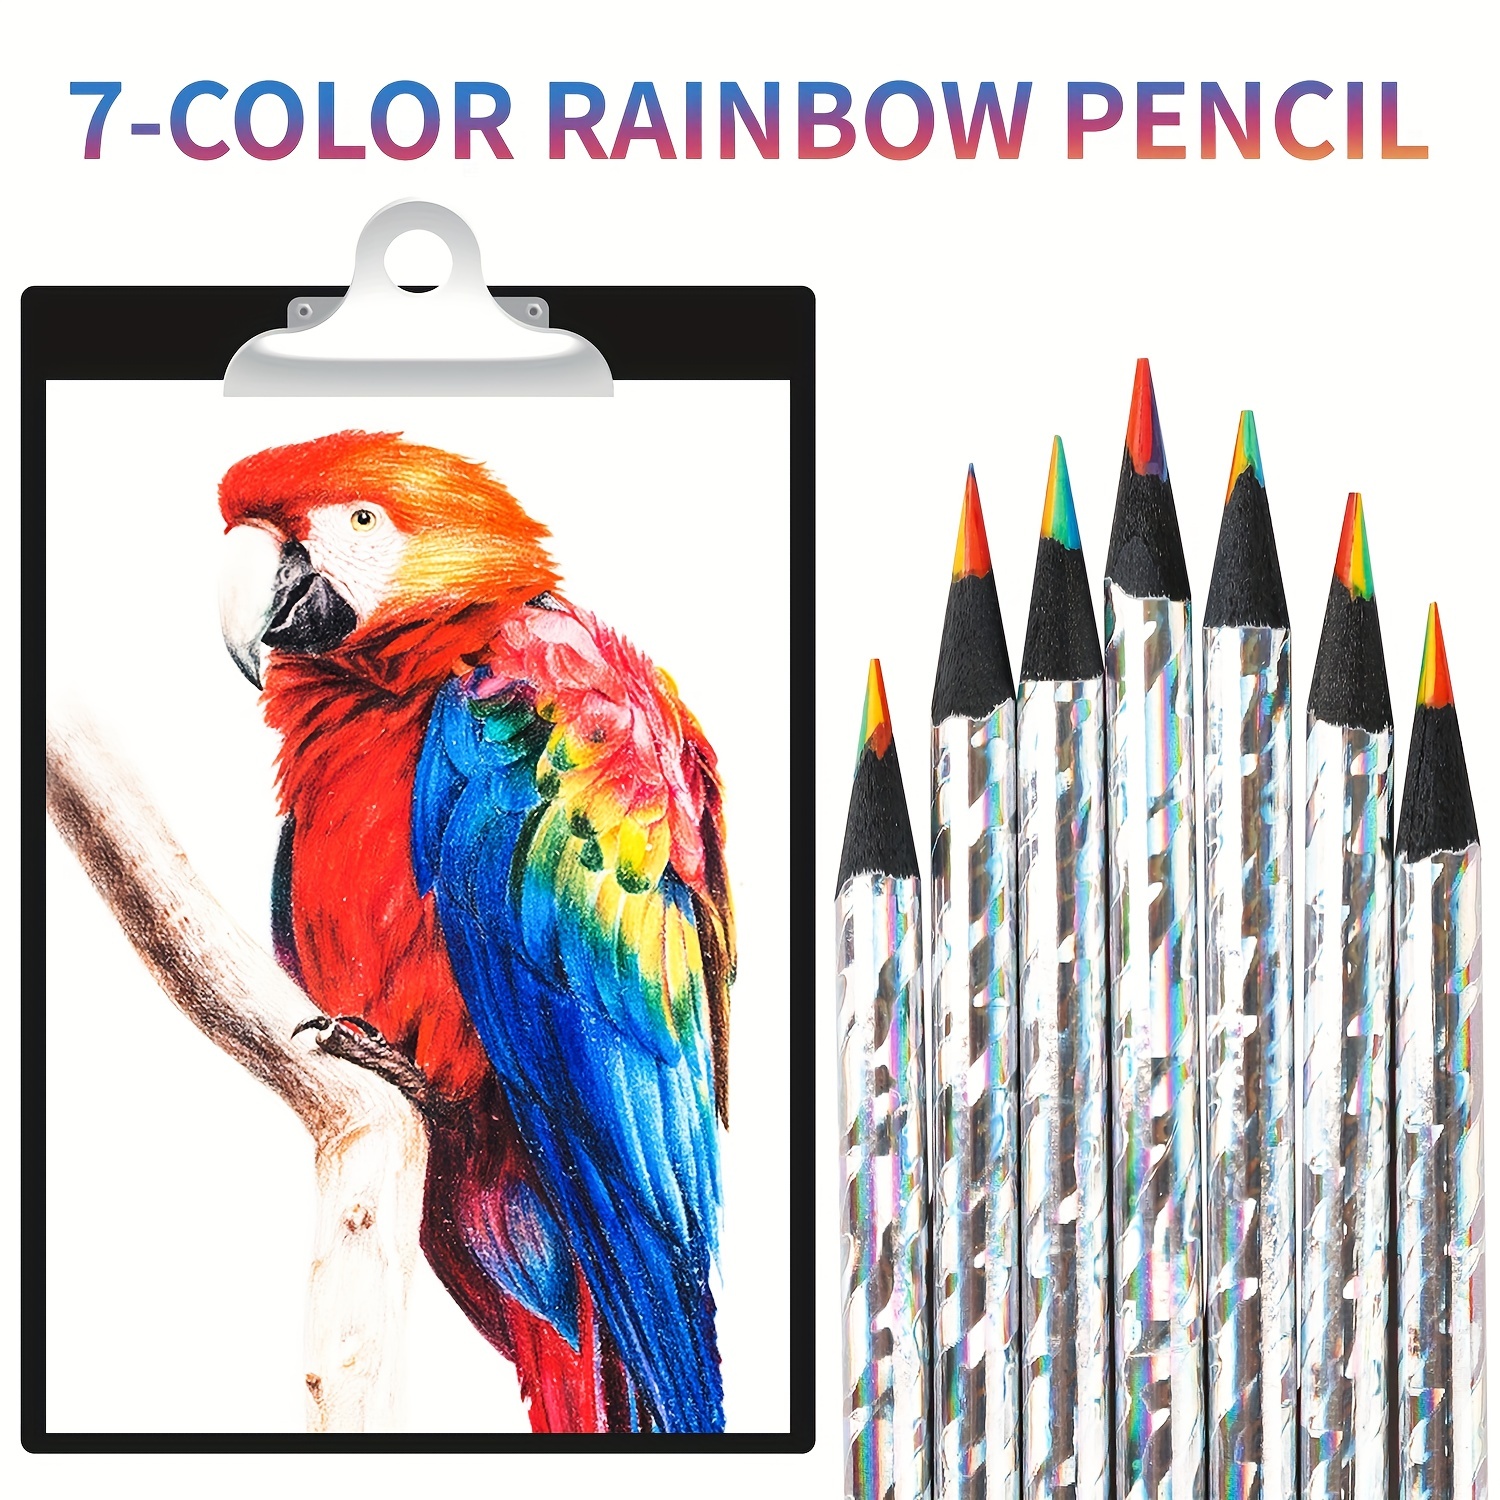  ThEast Black Wooden Rainbow Colored Pencils, 7 Color